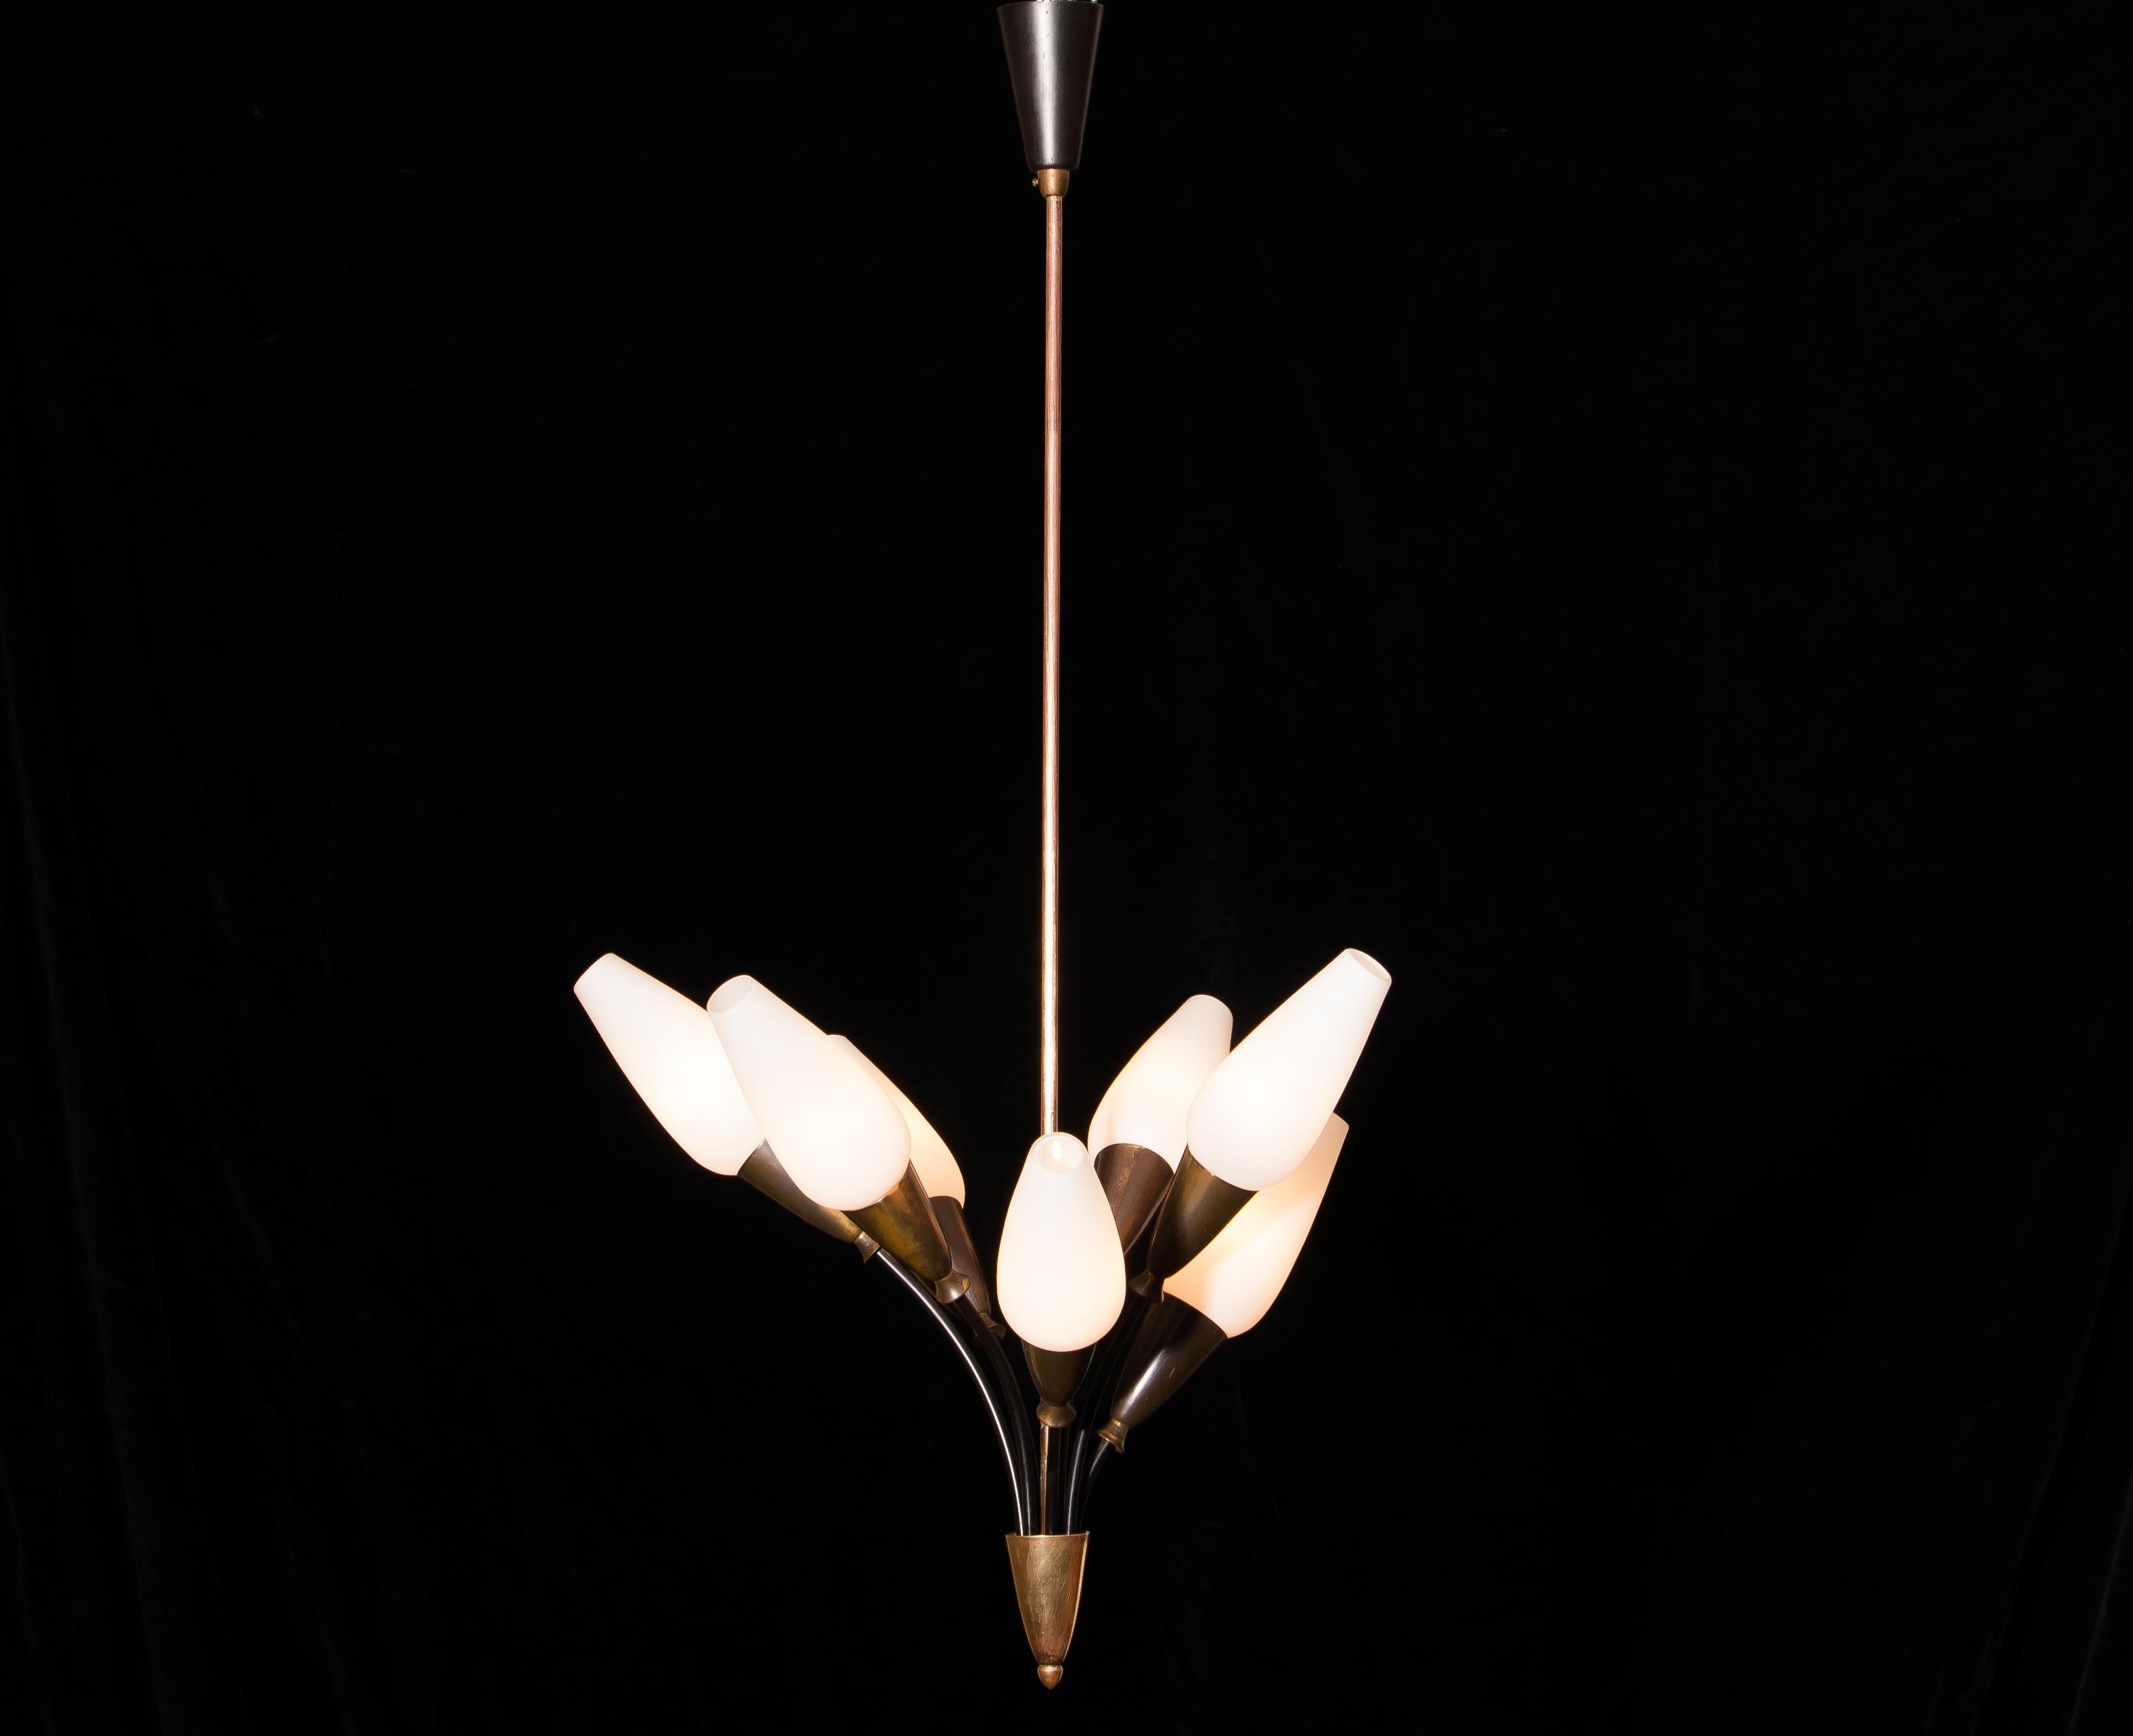 Beautiful tulip pendant made in Italy.
This chandelier is made of brass and has seven arms with white glass shades.
It is in a very nice condition.
Period 1950.
Dimensions: H 100 cm, ø 60 cm.